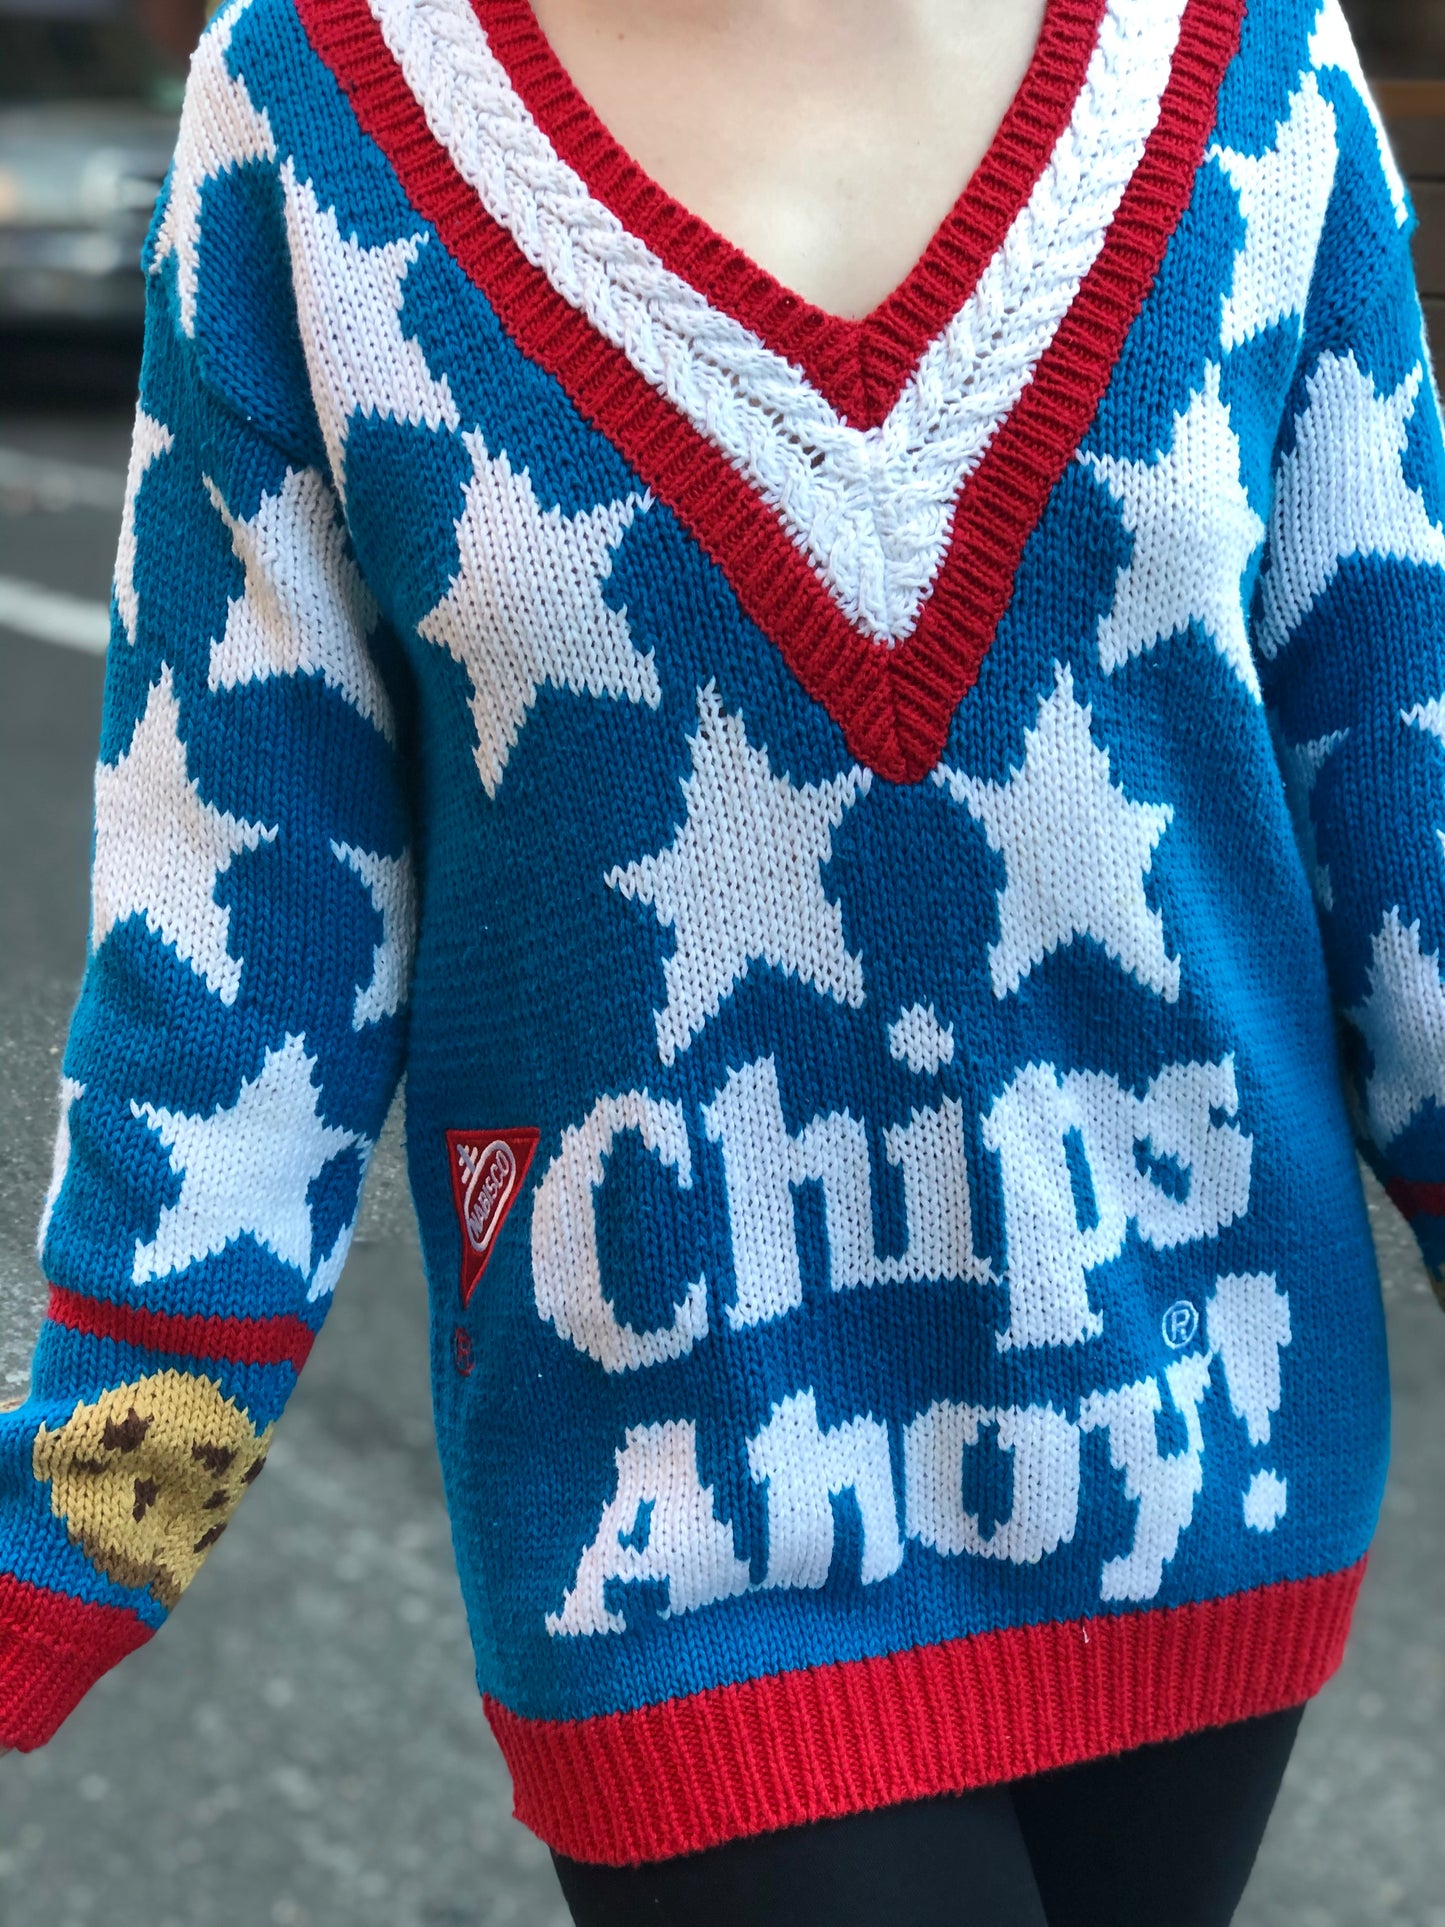 Vintage 90s Chips Ahoy Cookie Sweater - Spark Pretty